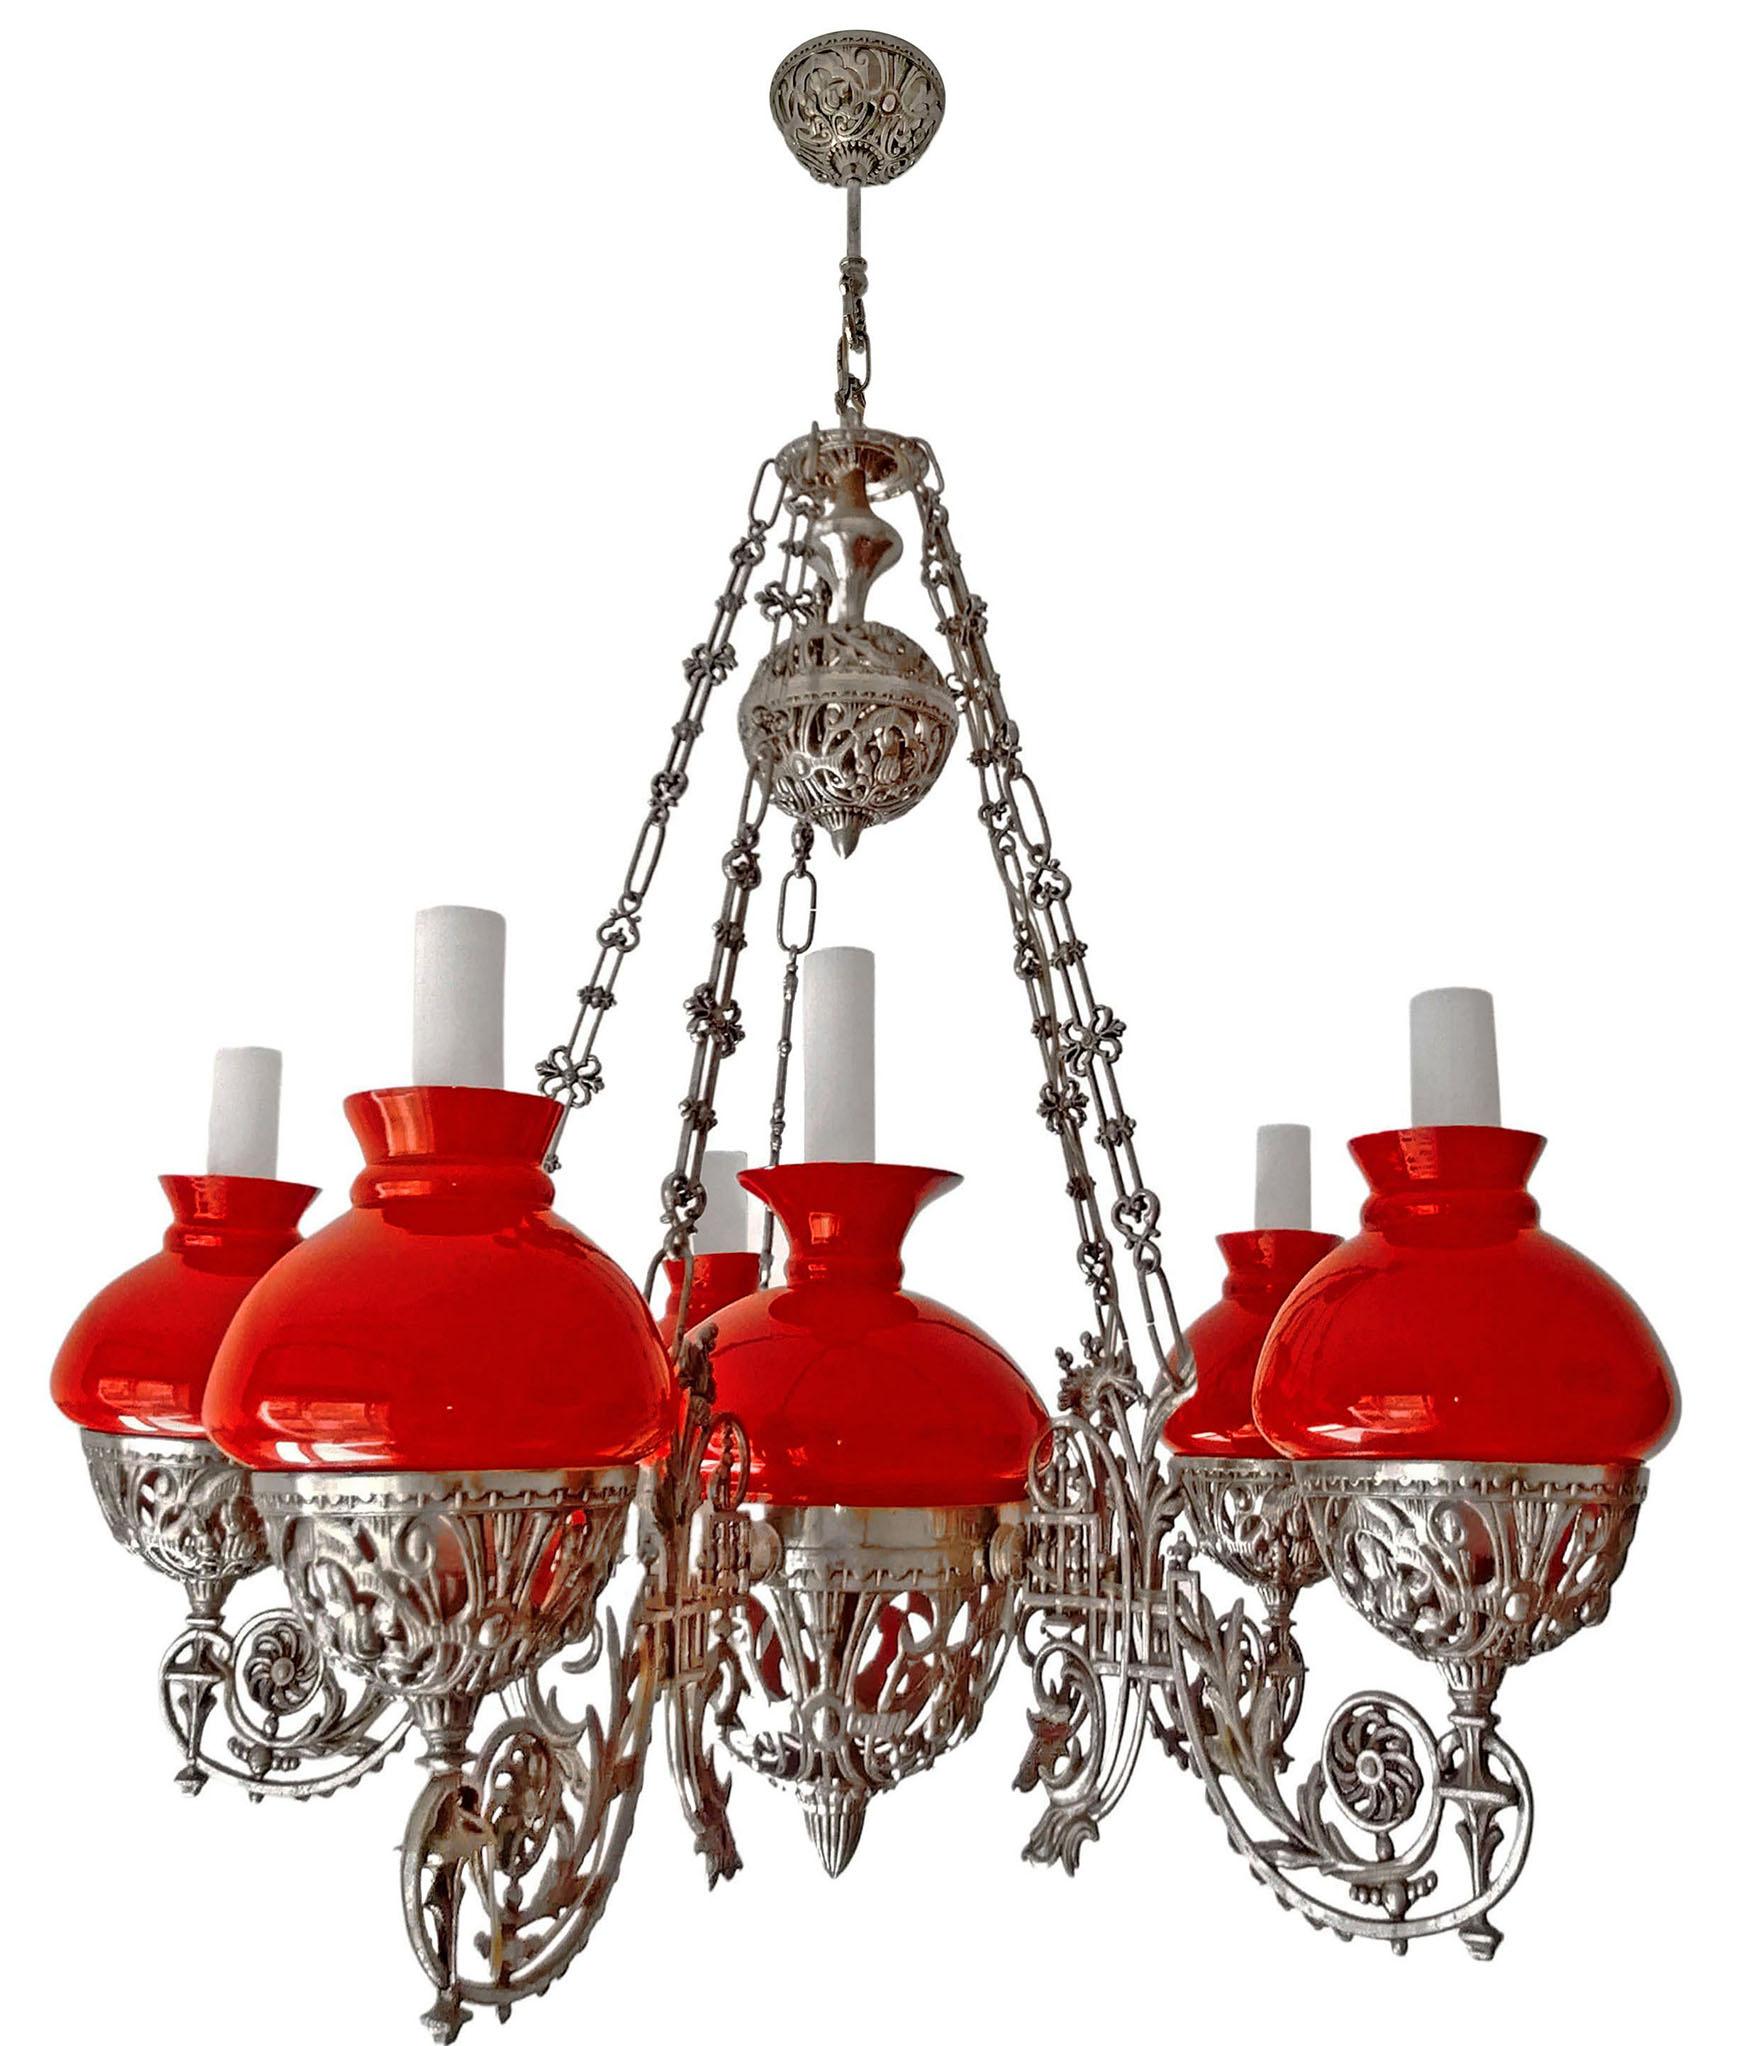 Large Victorian Chandelier Hanging Oil Lamp in Nickel & Opaline Red Glass Shades In Excellent Condition For Sale In Coimbra, PT